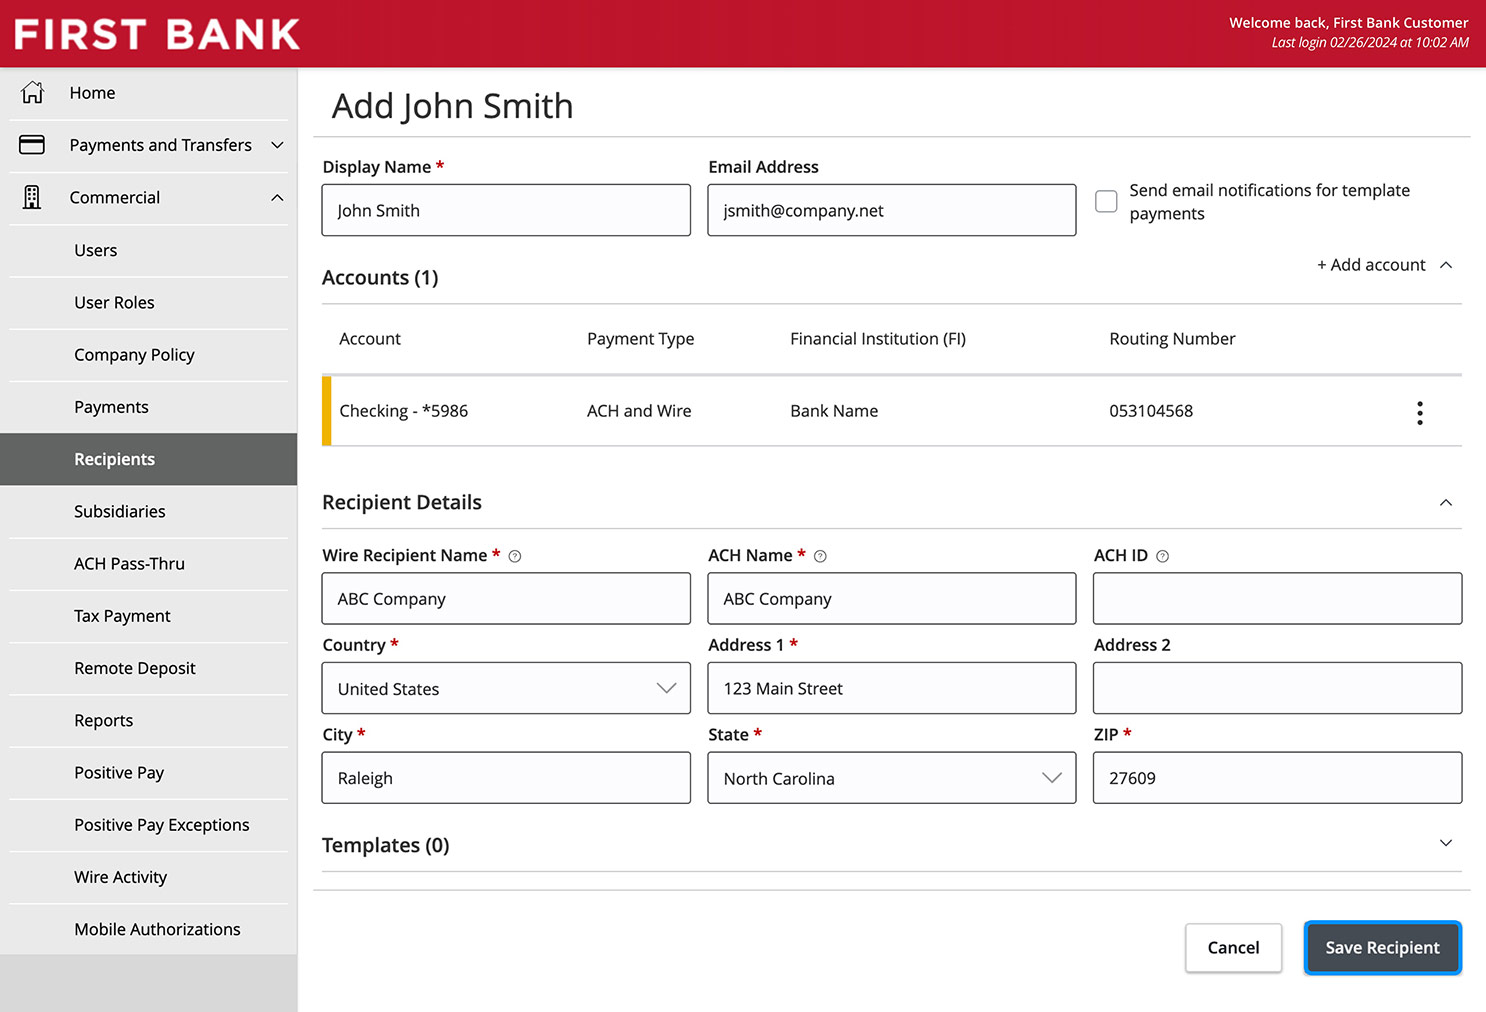 Online Banking Screen showing the Save Recipient button.